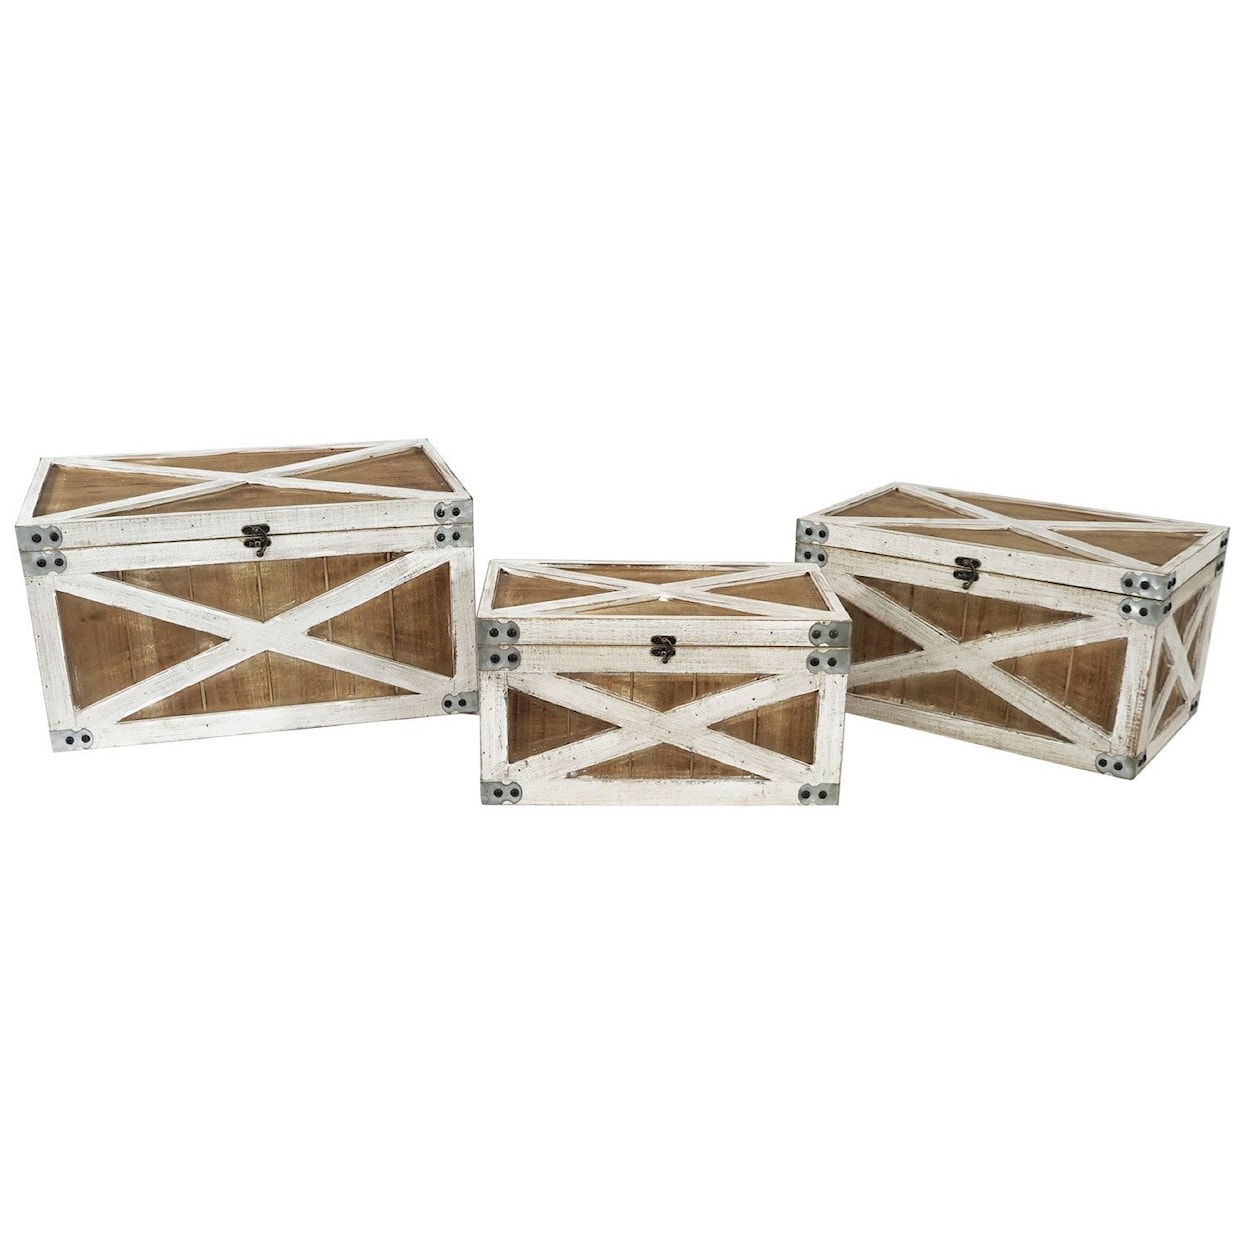 Crestview Collection Decorative Accessories Nested Trunks